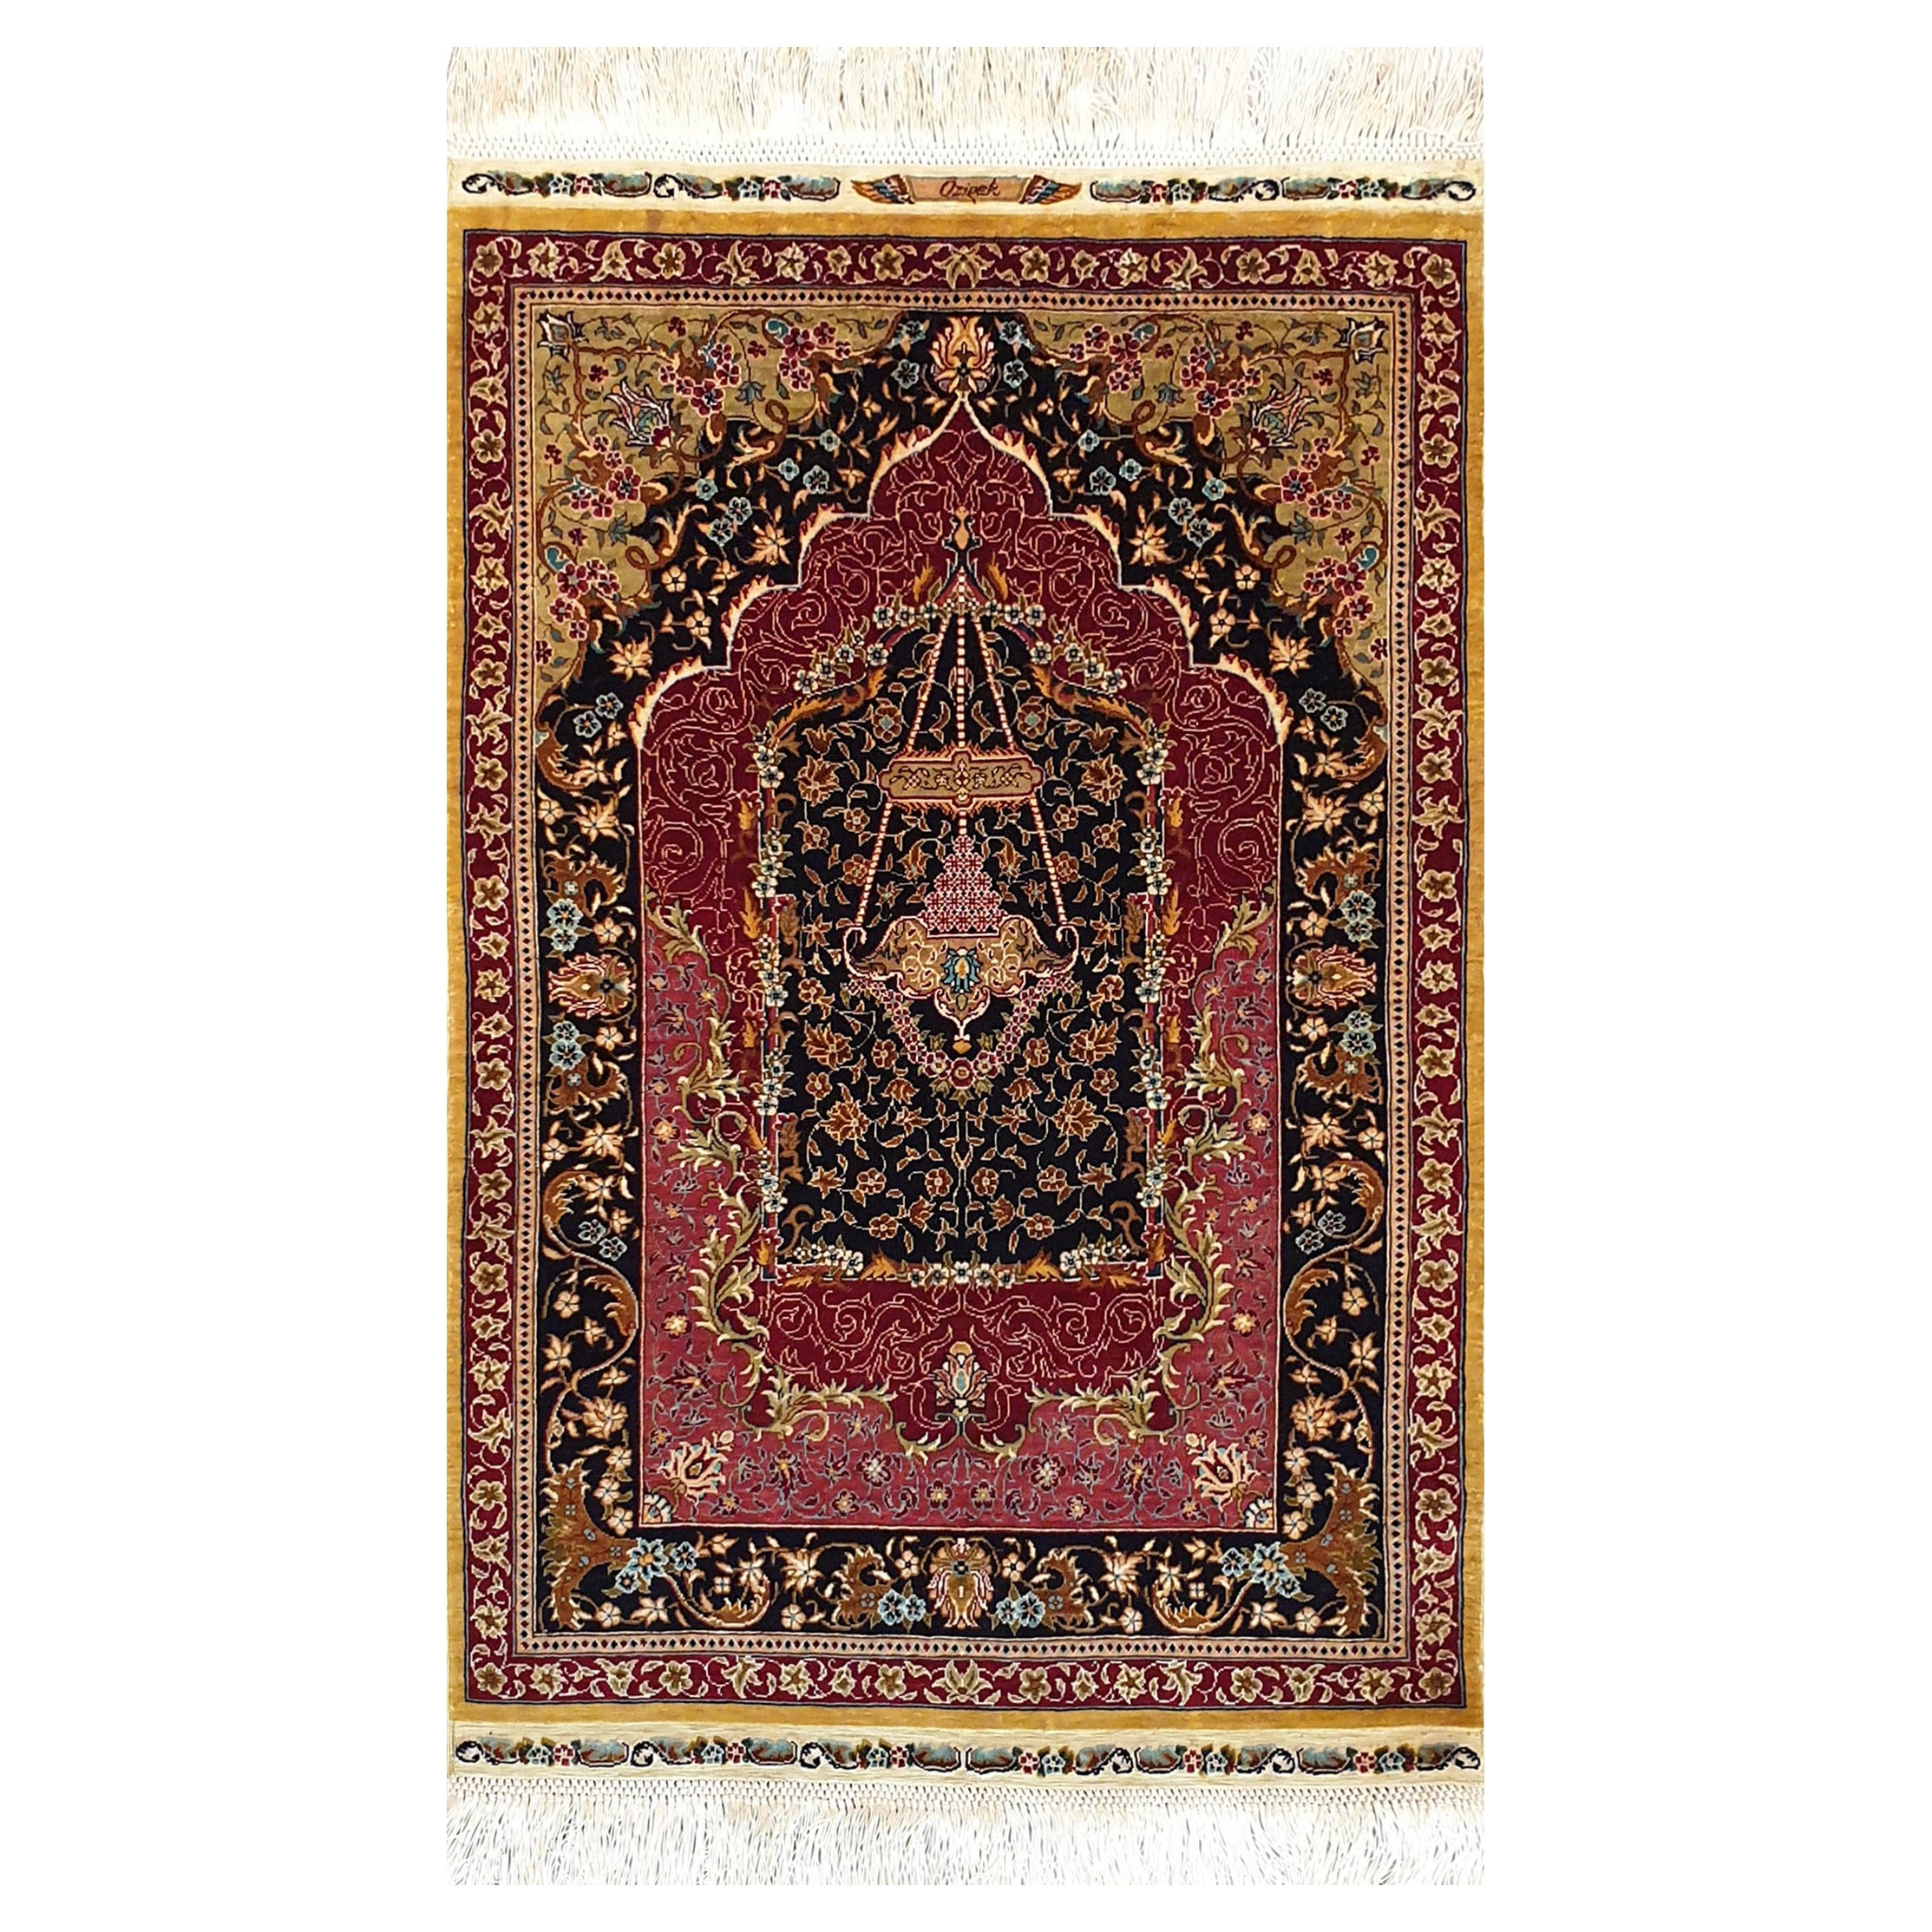 Collectible Turkish Rug - Hereke with signature, 100% silk - No. 747 For Sale